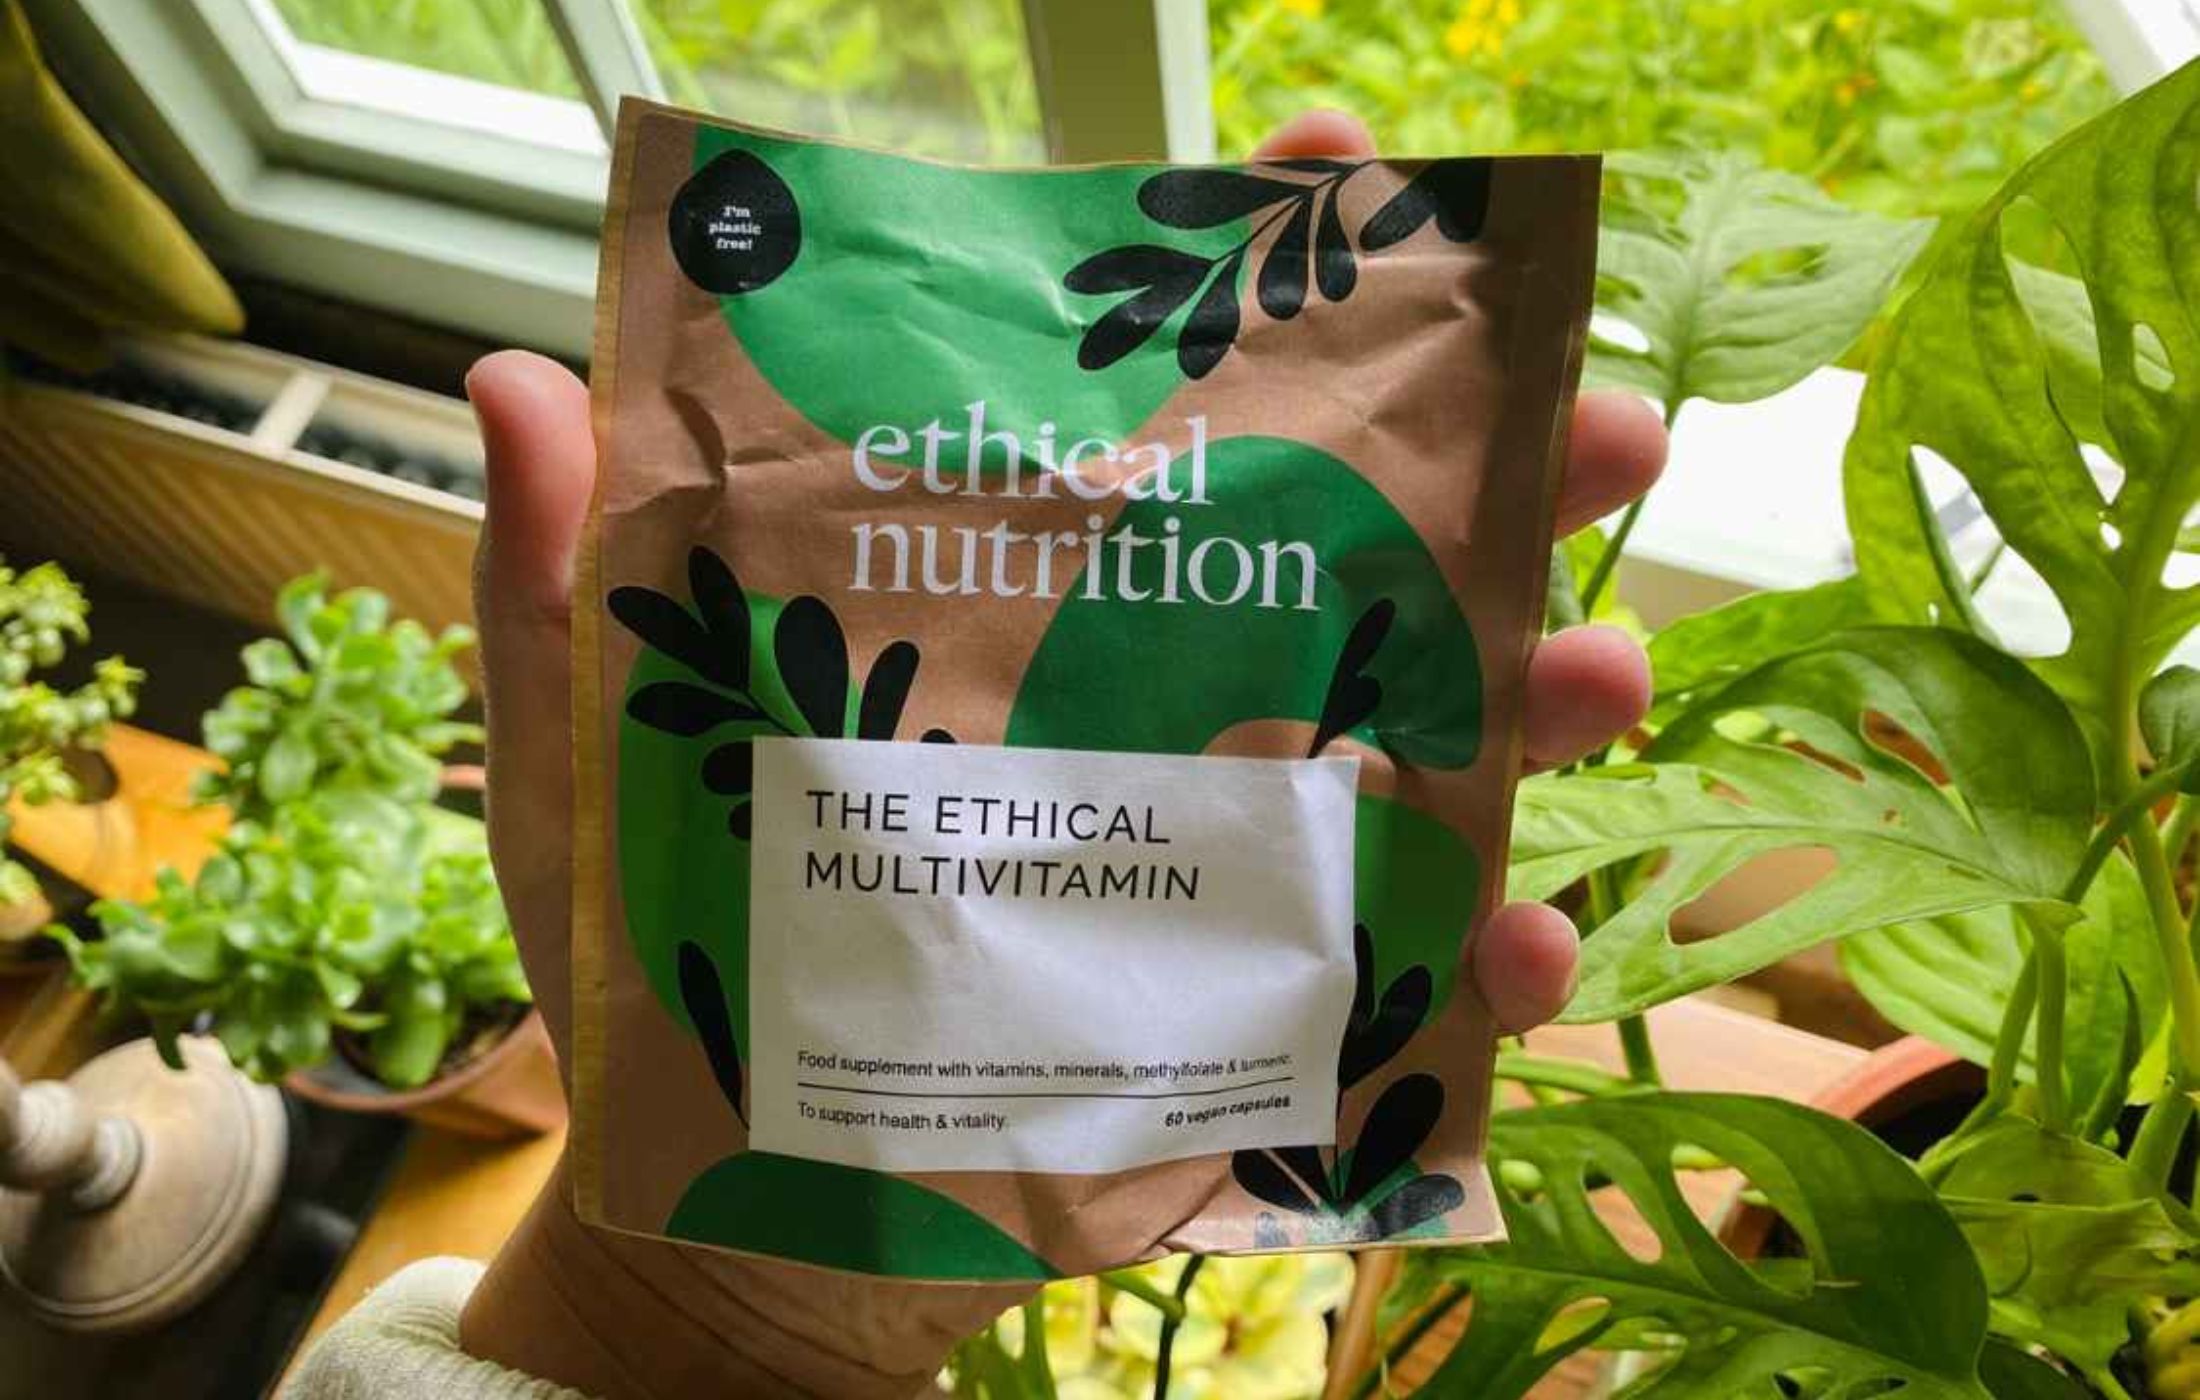 A pouch of vegan multivitamins from Ethical Nutrition that contain vegan iodine